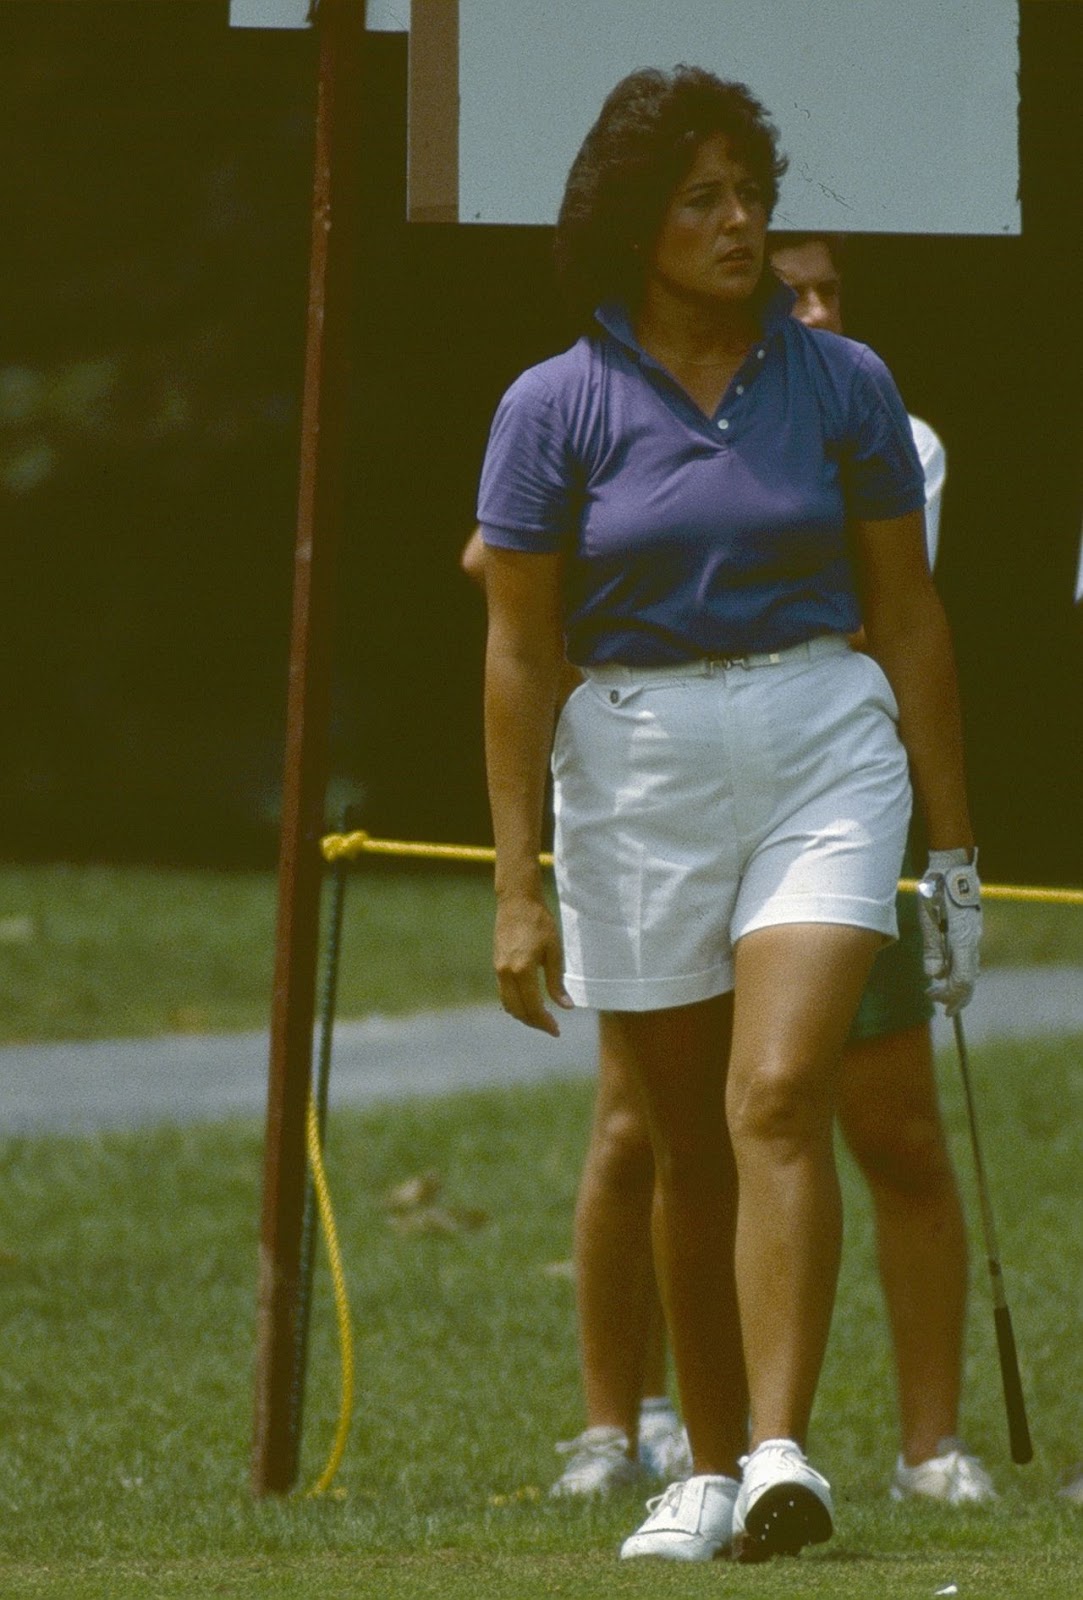 Nancy Lopez is currently the youngest golfer ever to be inducted into the LPGA Hall of Fame.